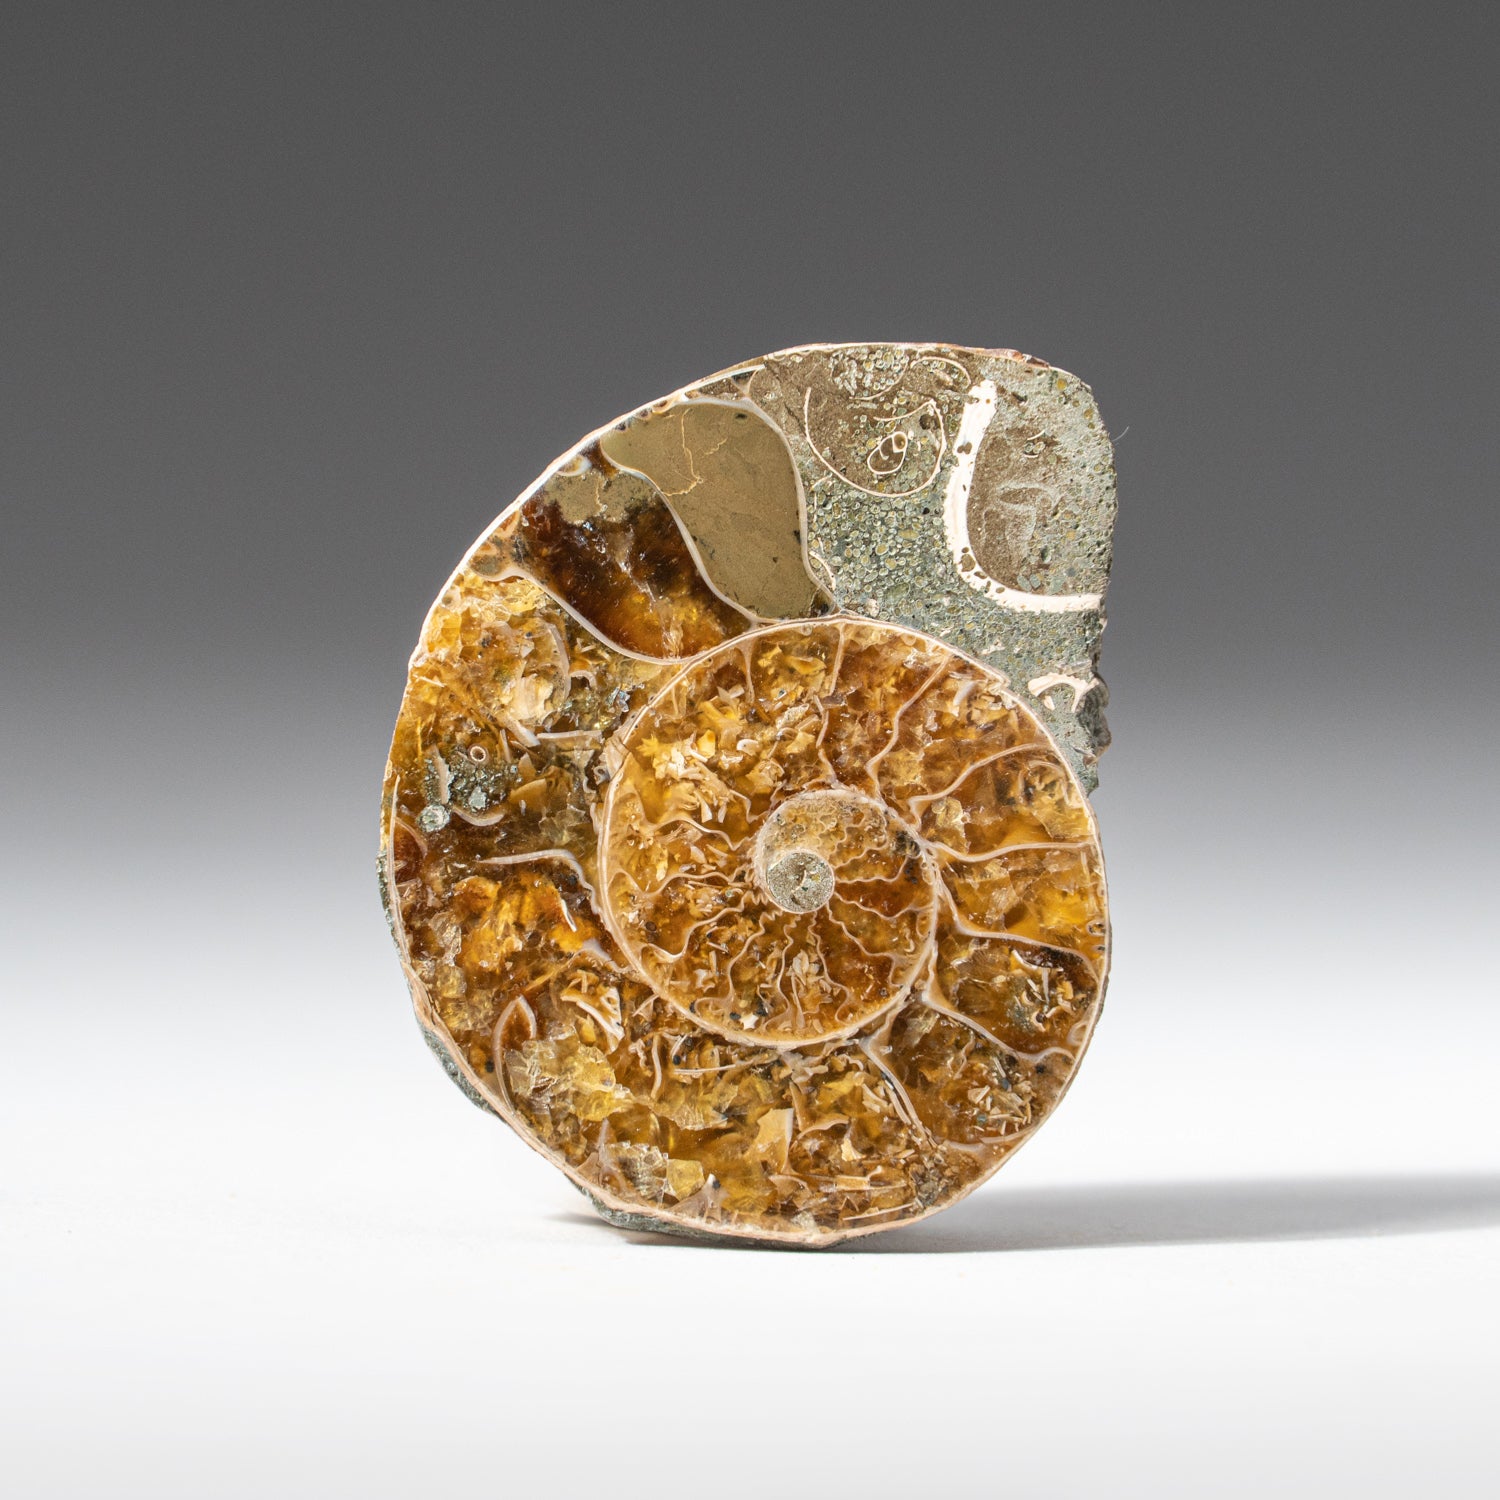 Extra-Small Calcified Ammonite Half From Madagascar (10 grams)